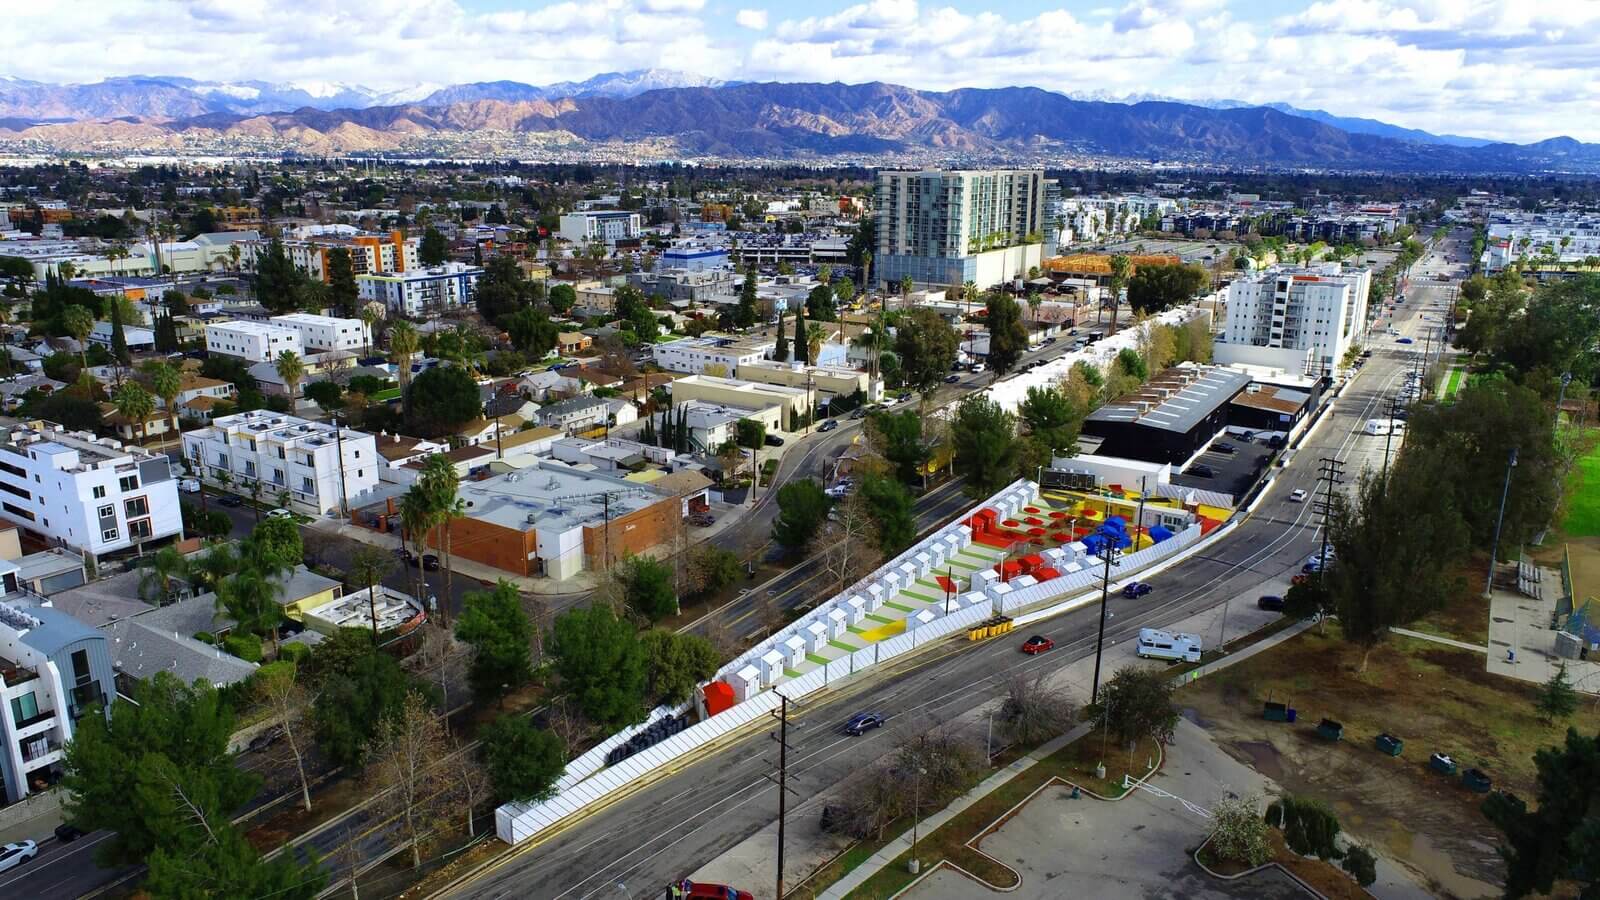 aerial view of brightly colored bridge housing community with mountains in background